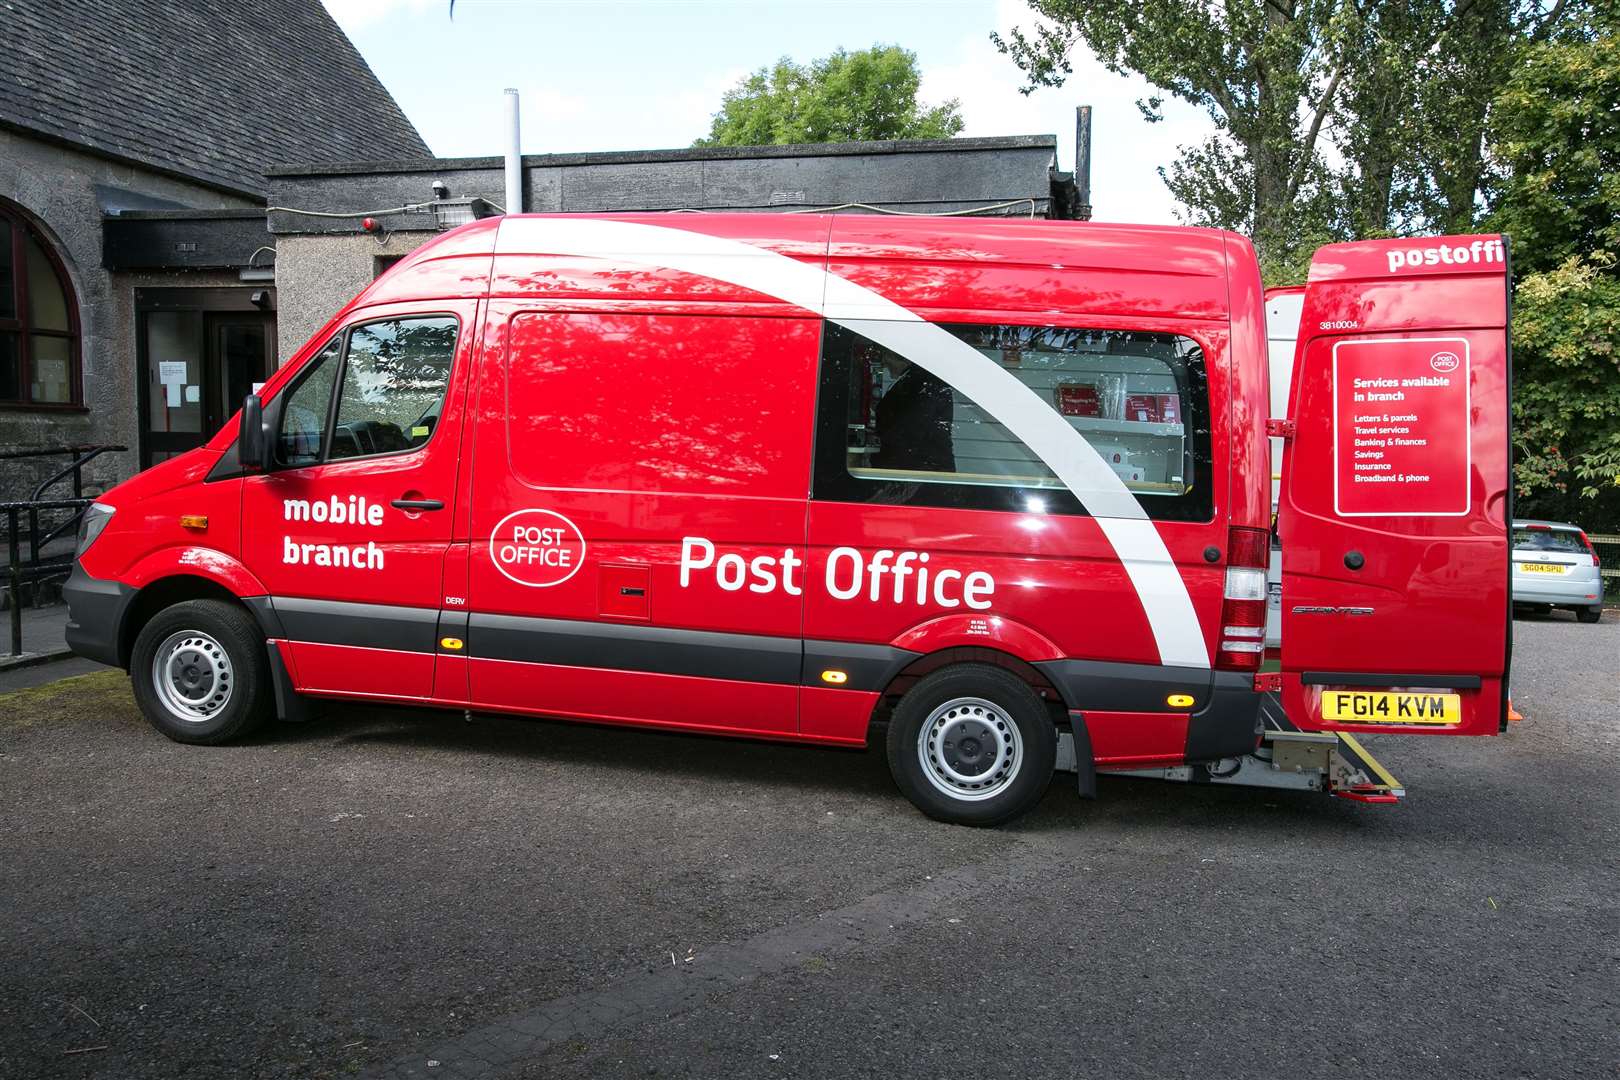 Mobile post office will serve rural communities. Picture: Mark K Jackson